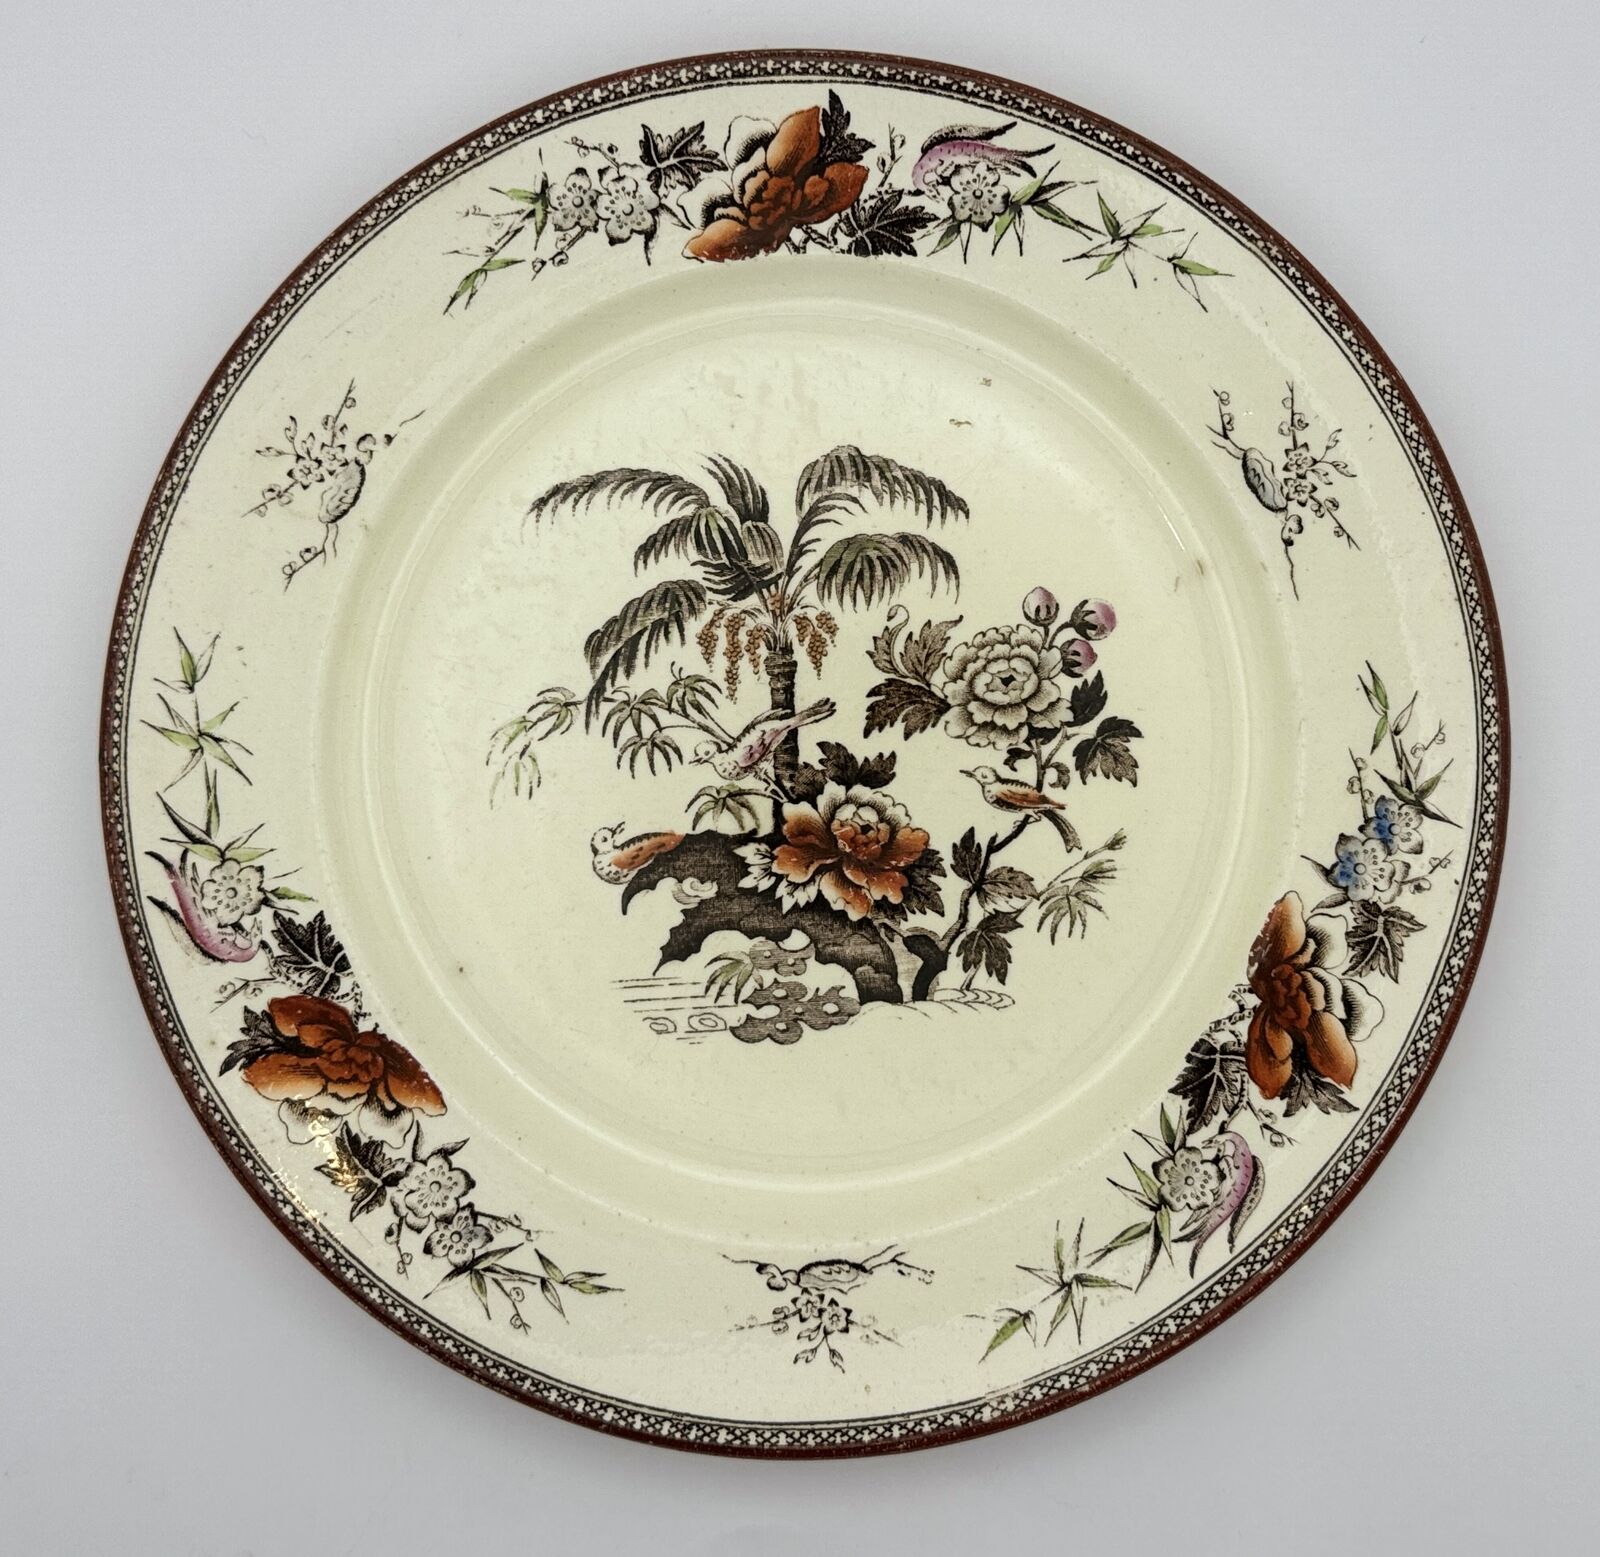 Antique Wedgwood Plate From 1700's with Floral and Bird Design